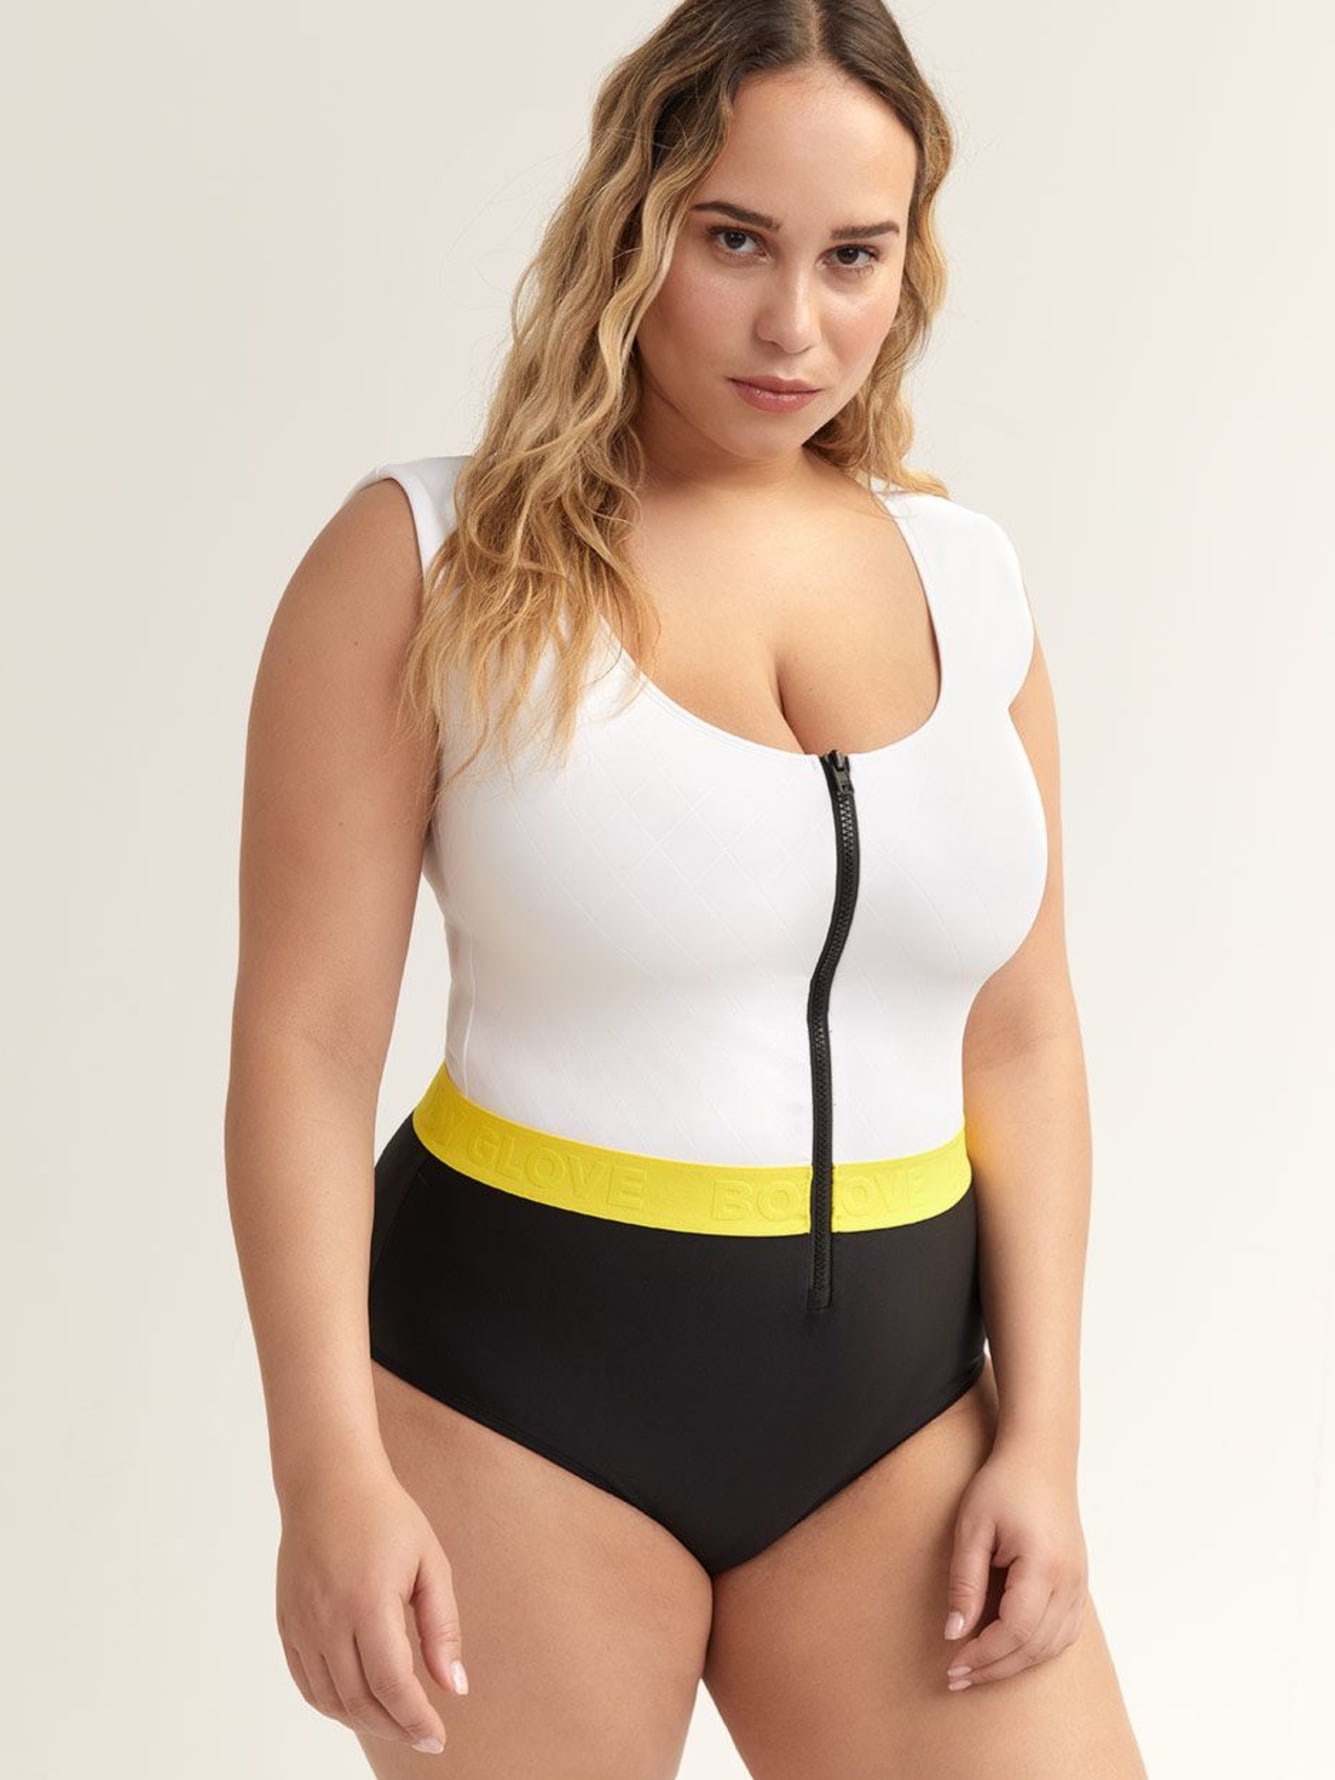 Body Glove Bombshell Holly One Piece Bathing Suit Penningtons